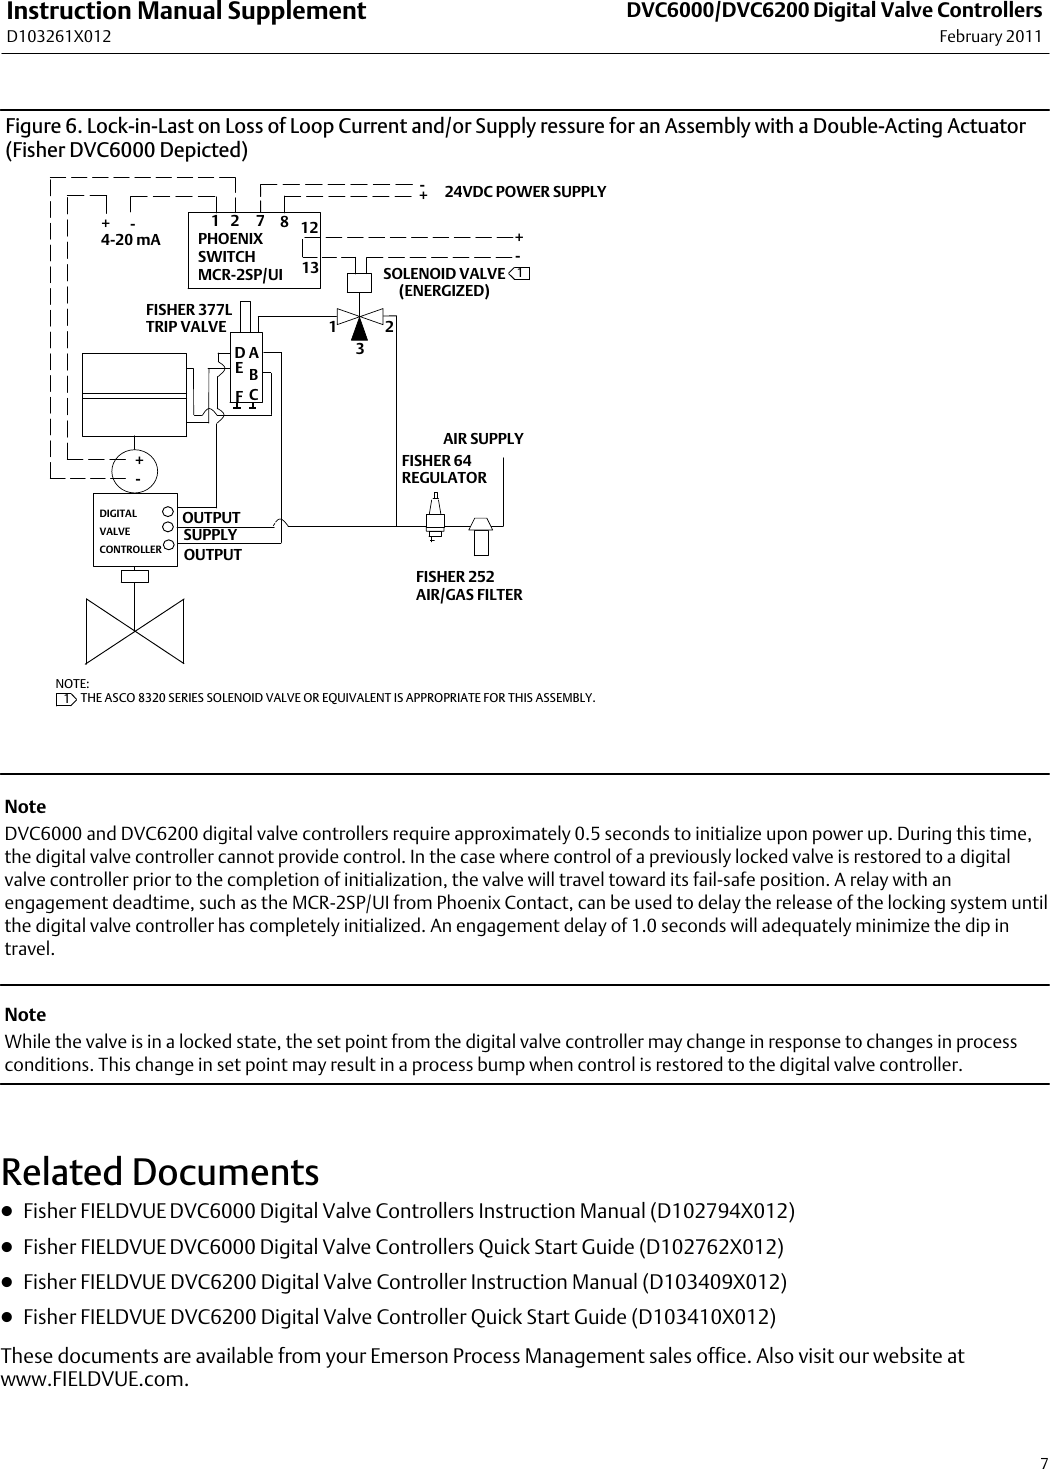 Page 7 of 8 - Emerson Emerson-Fisher-Fieldvuedvc2000-Digital-Valve-Controller-Instruction-Manual-  Emerson-fisher-fieldvuedvc2000-digital-valve-controller-instruction-manual